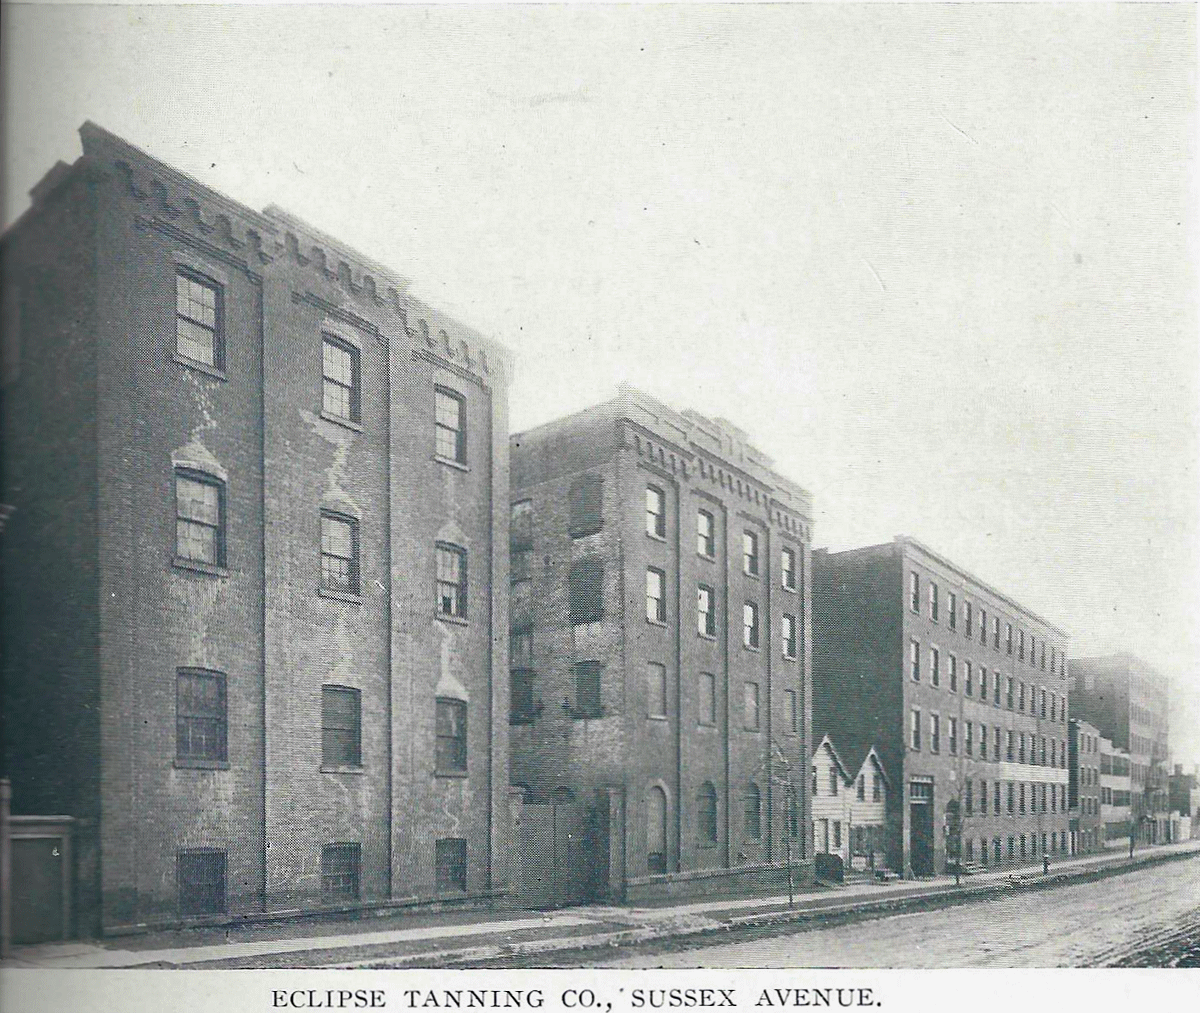 119 Sussex Avenue
Eclipse Tanning Co.
From "Newark - The City of Industry" Published 1912
